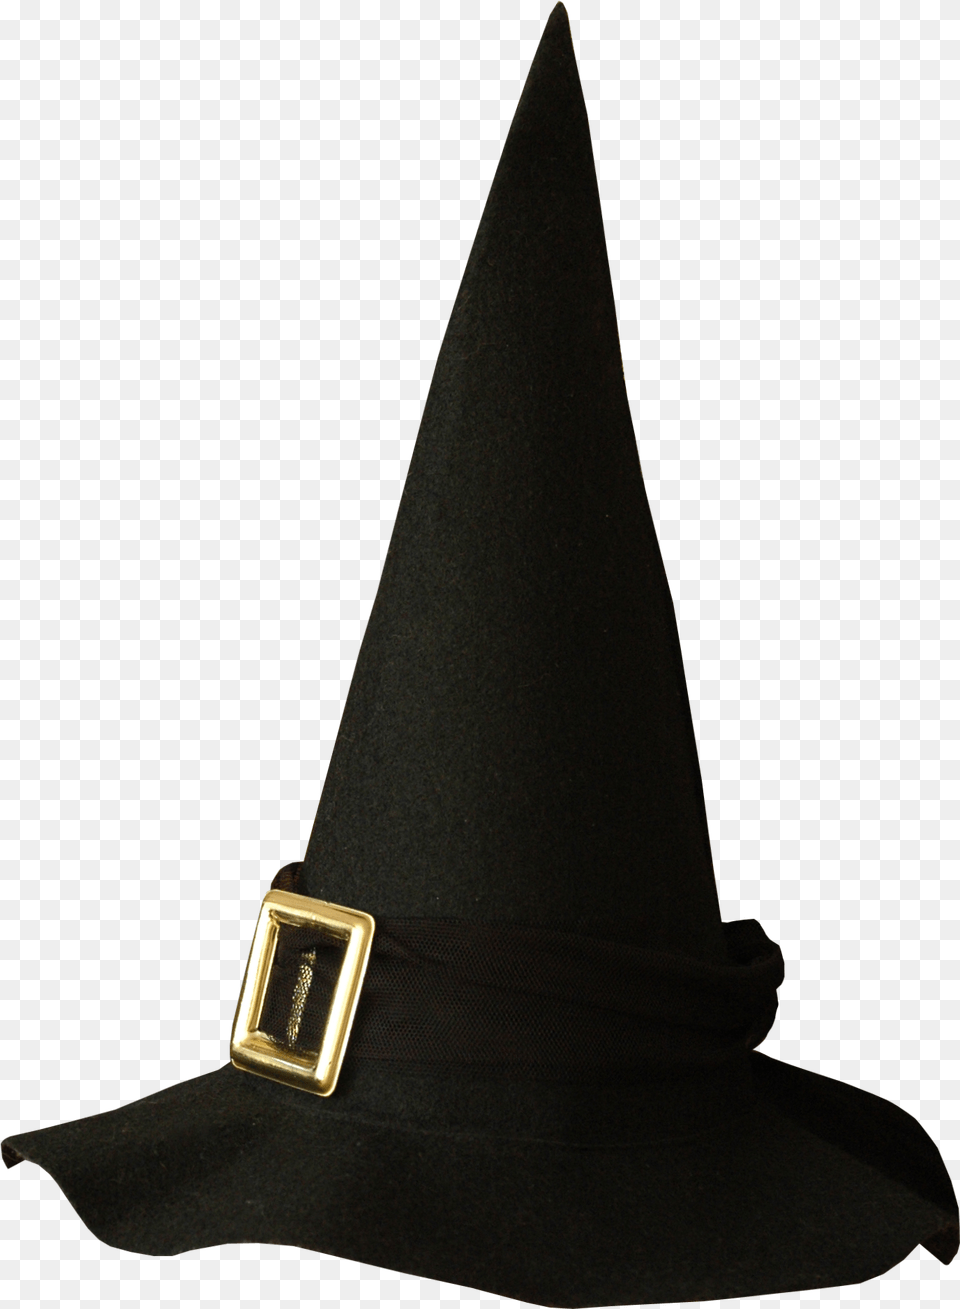 Black Witch Hat Transparent Picture Gallery Yopriceville Witch Hat Transparent Background, Clothing, Accessories, Buckle Png Image